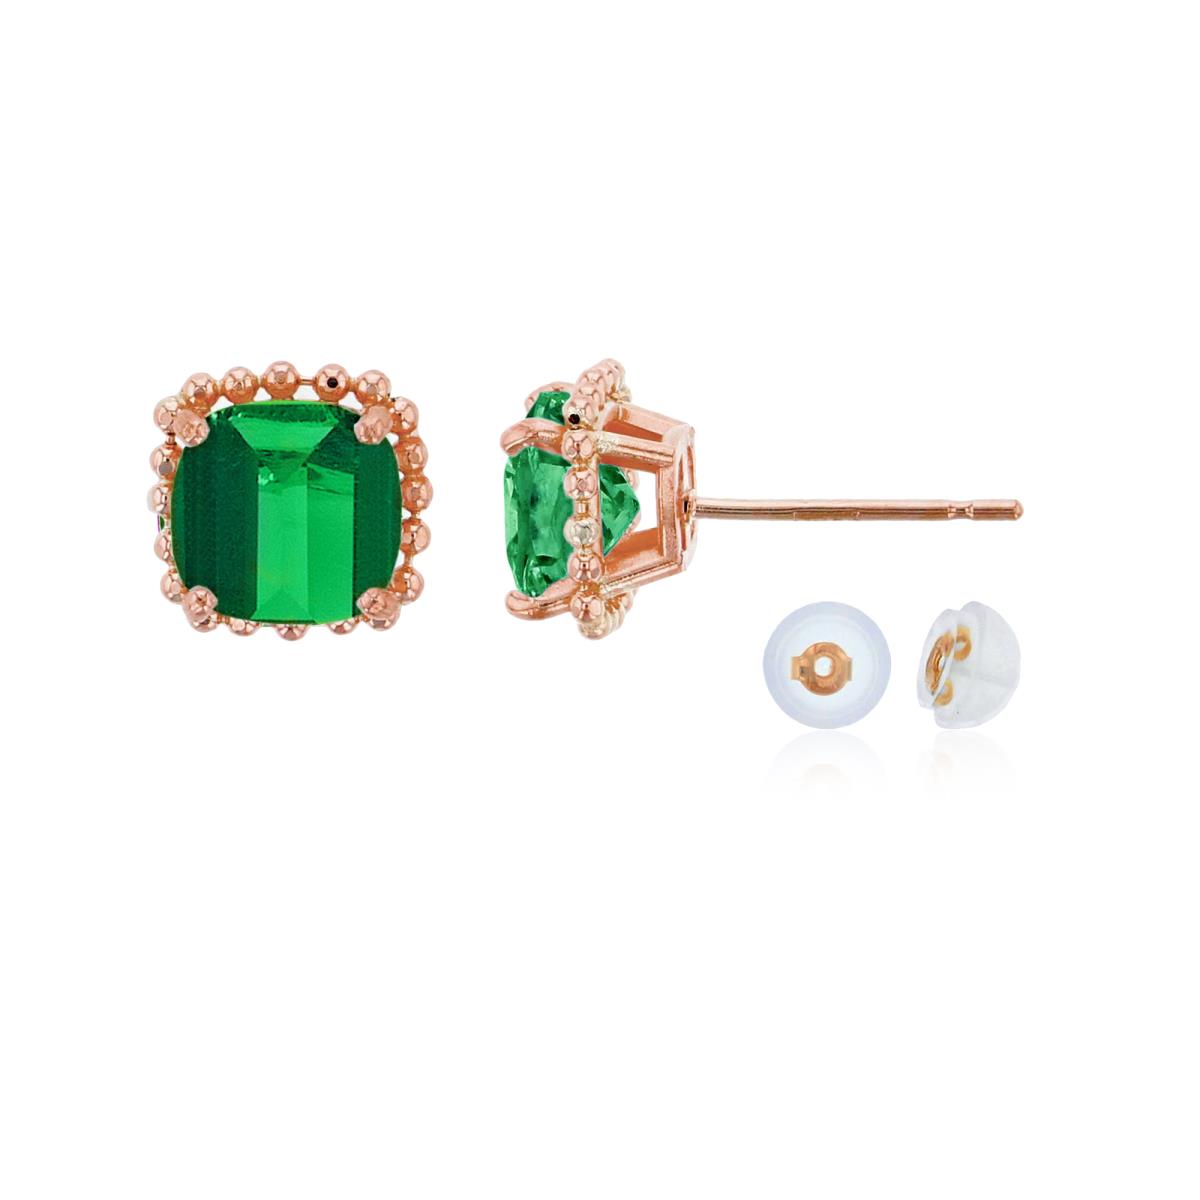 10K Rose Gold 6x6mm Cushion Cut Created Emerald Bead Frame Stud Earring with Silicone Back